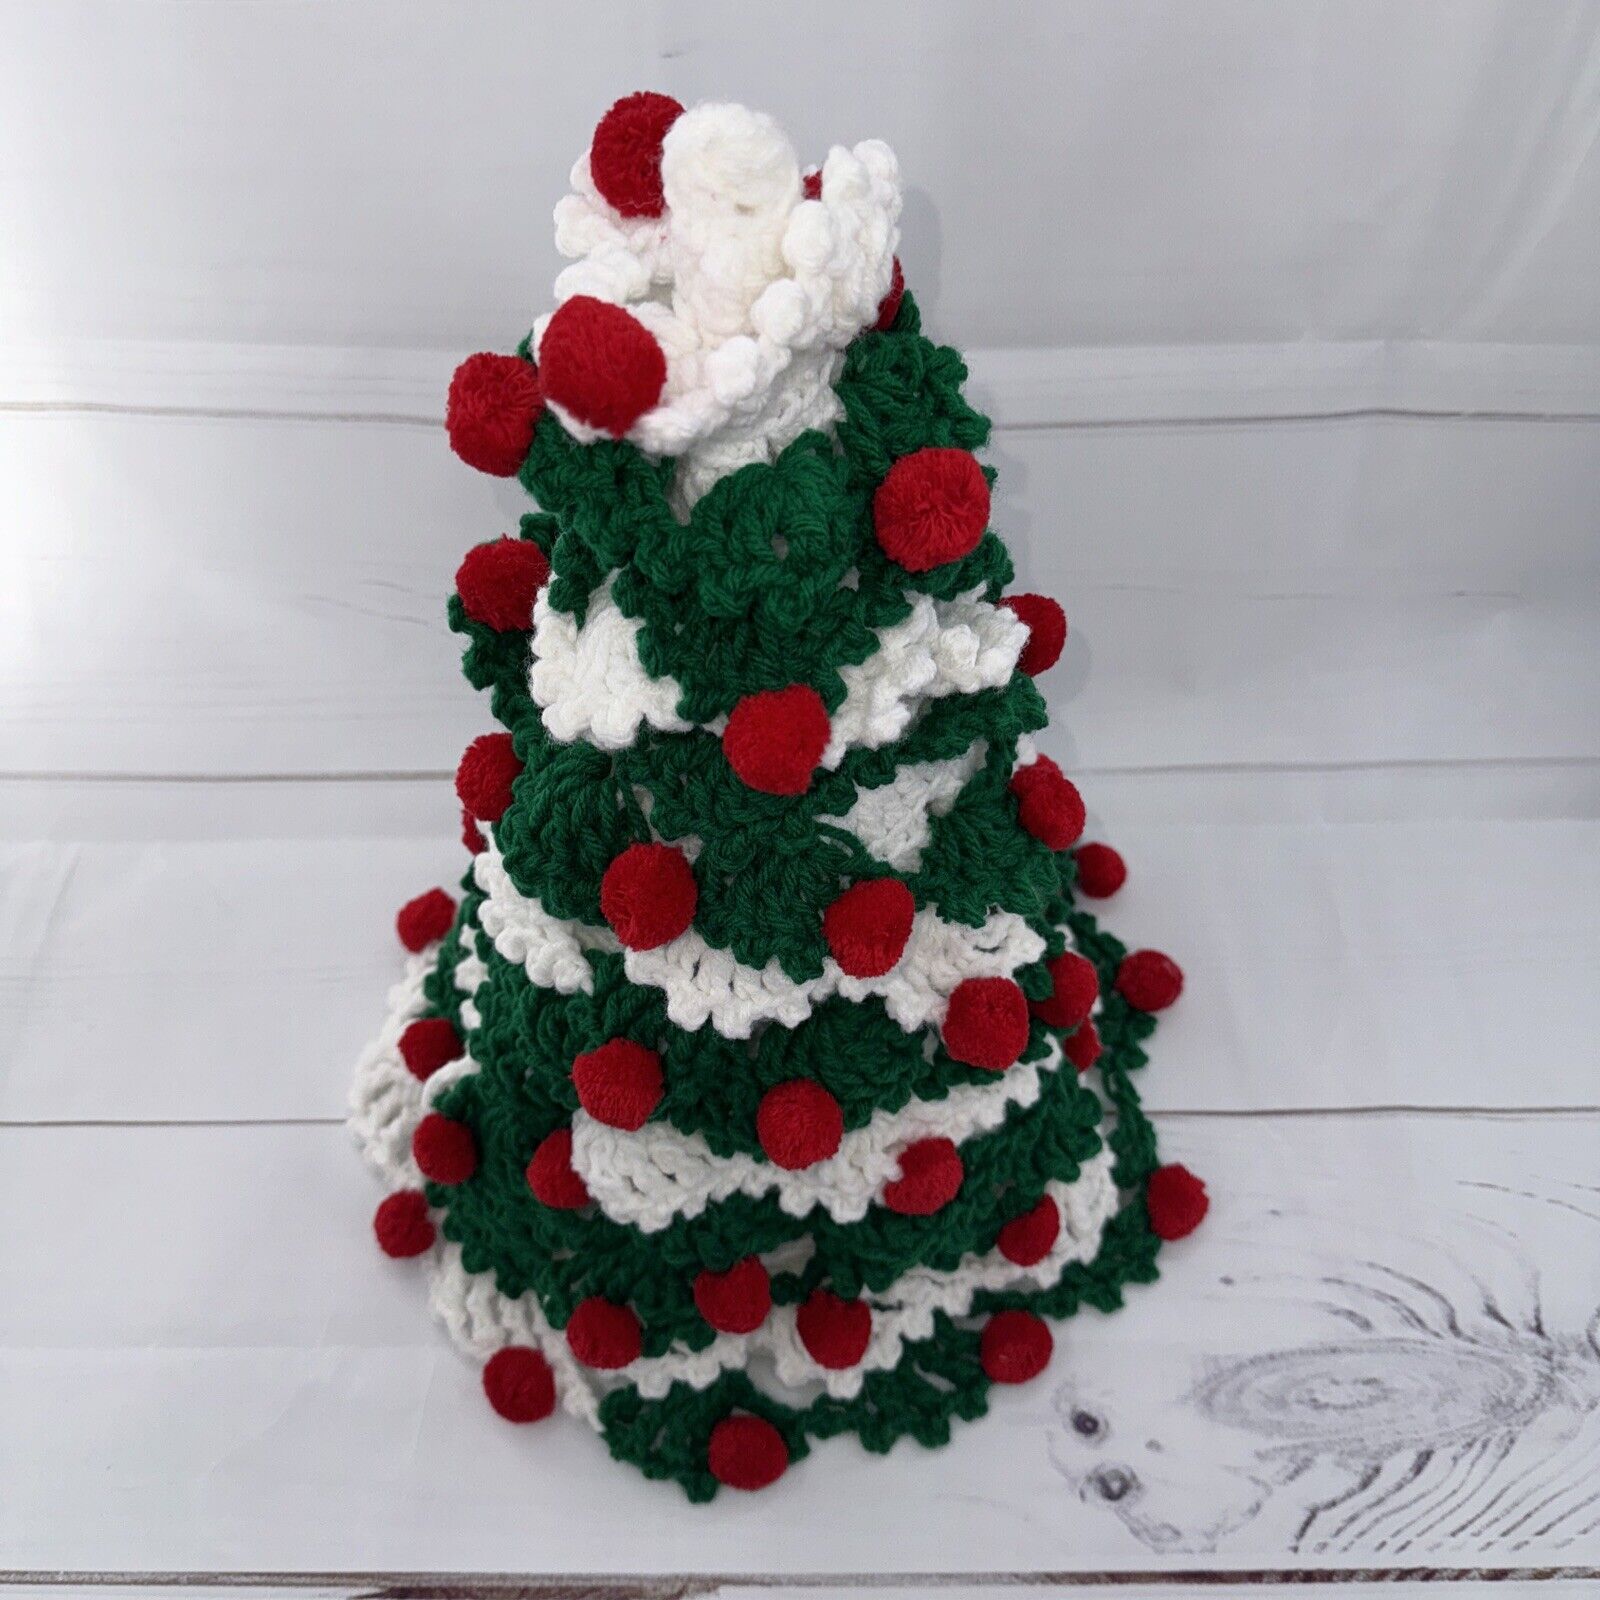 Crocheted 16” Christmas Tree Decoration Red Green White Handcrafted